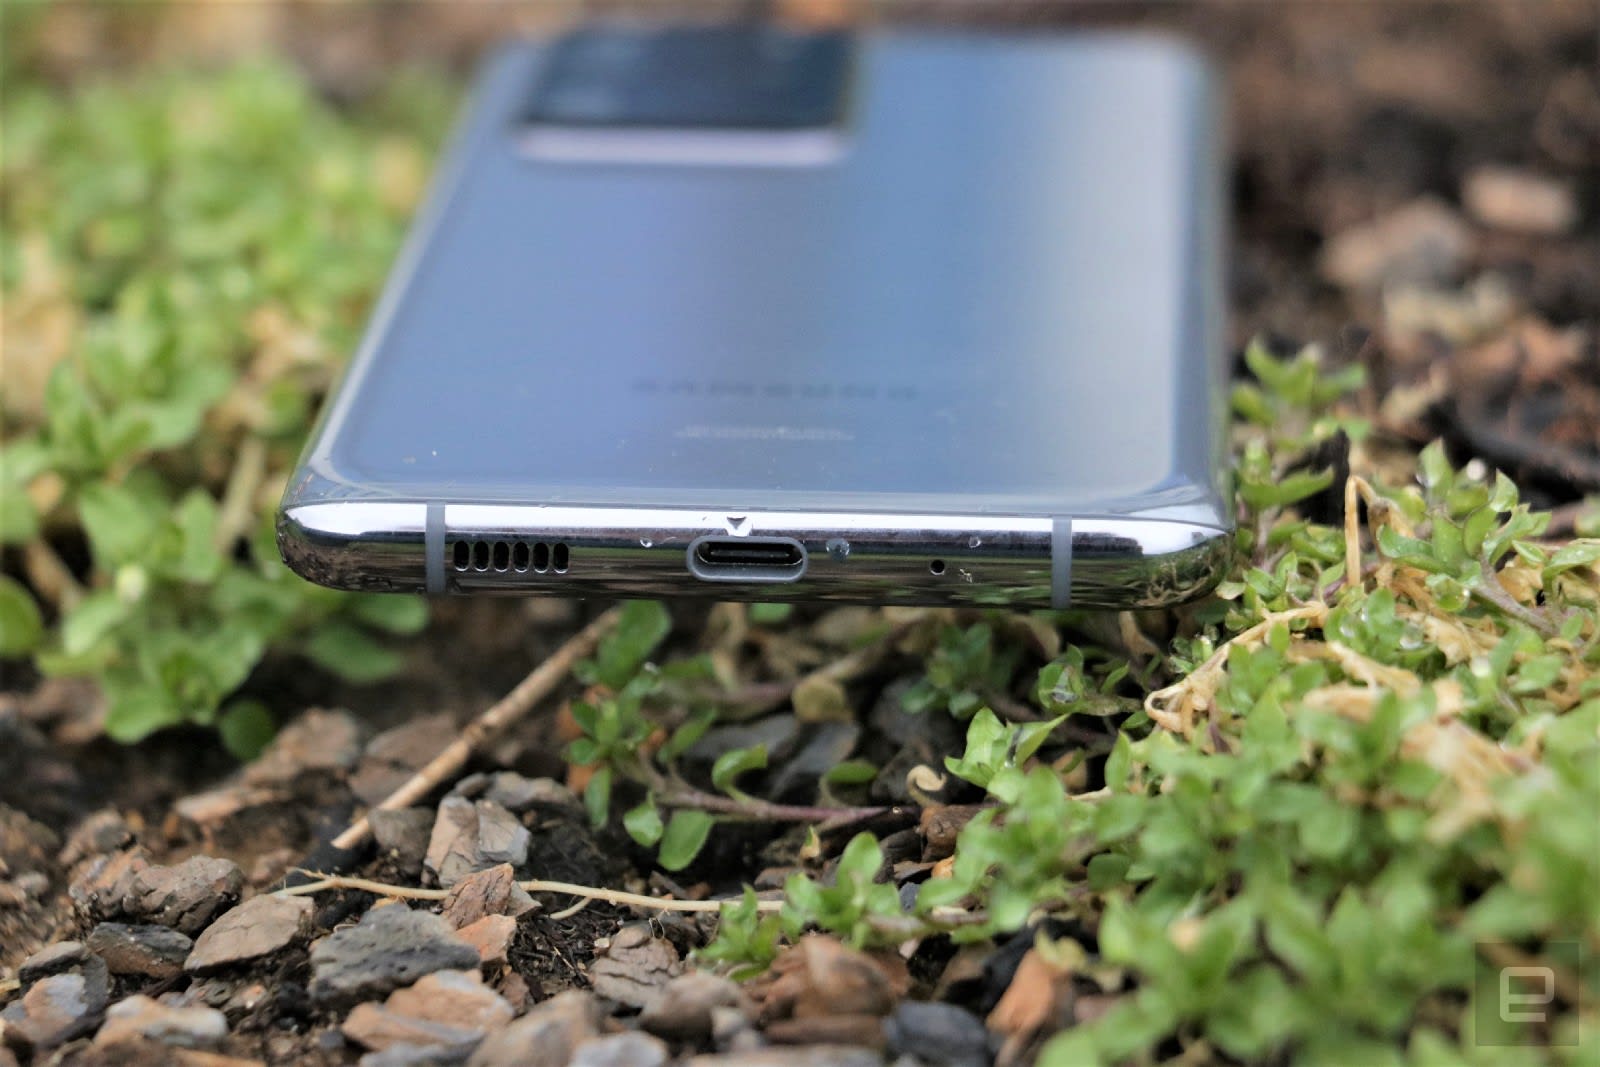 Samsung Galaxy S20 Ultra review